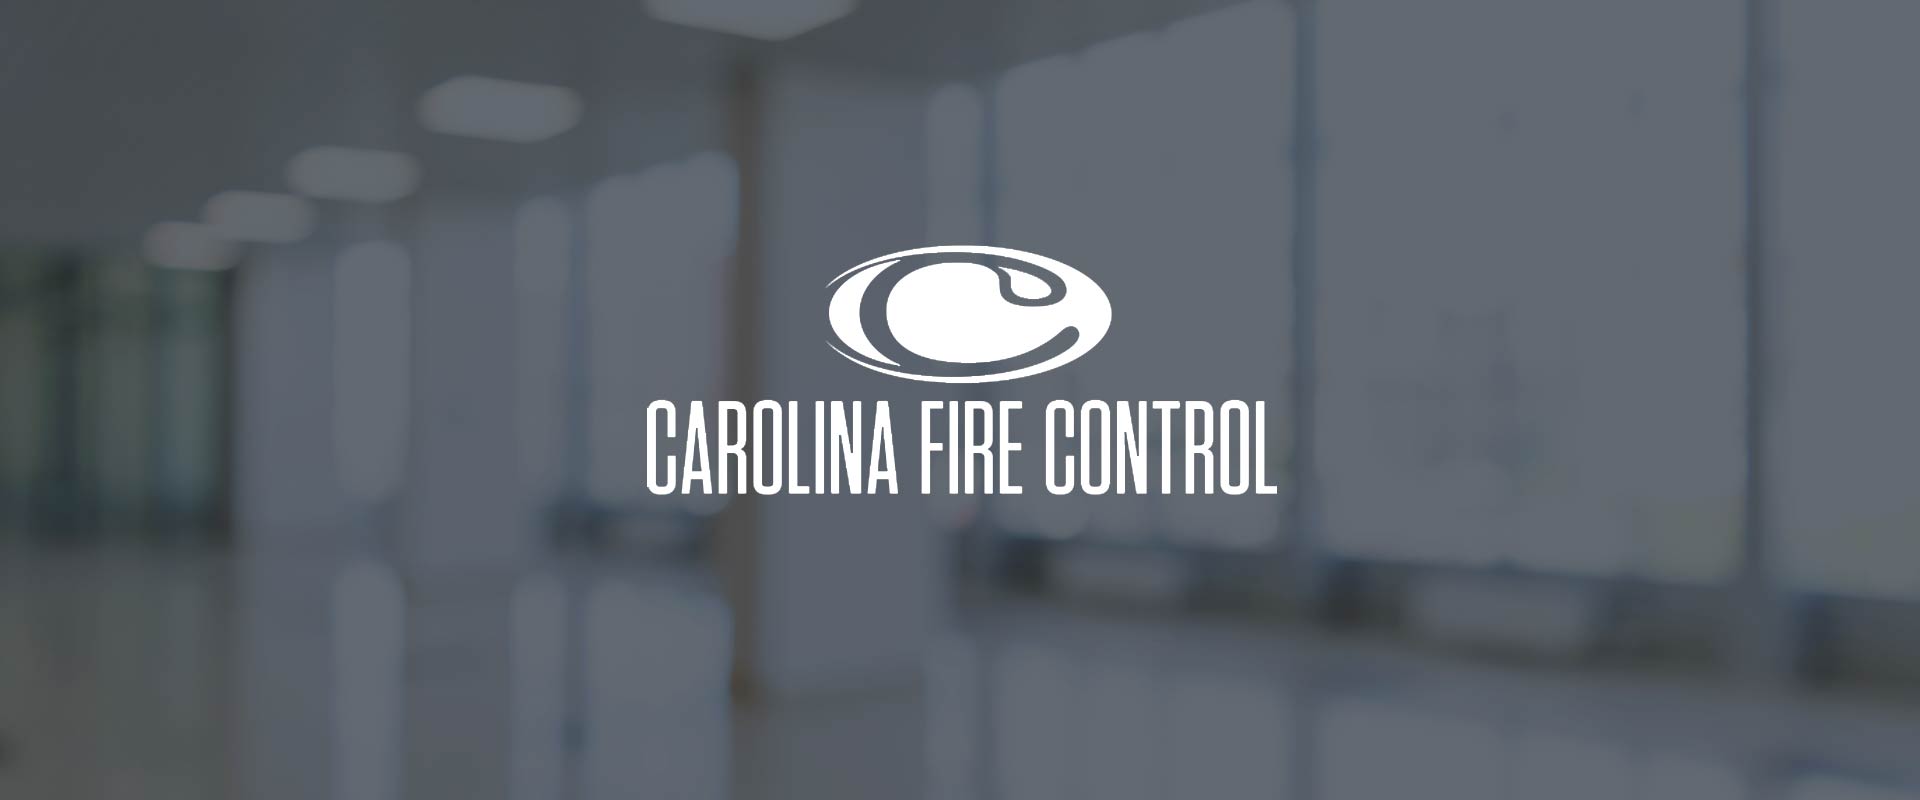 The Hiller Companies Announces the Purchase of Carolina Fire Control, Inc.